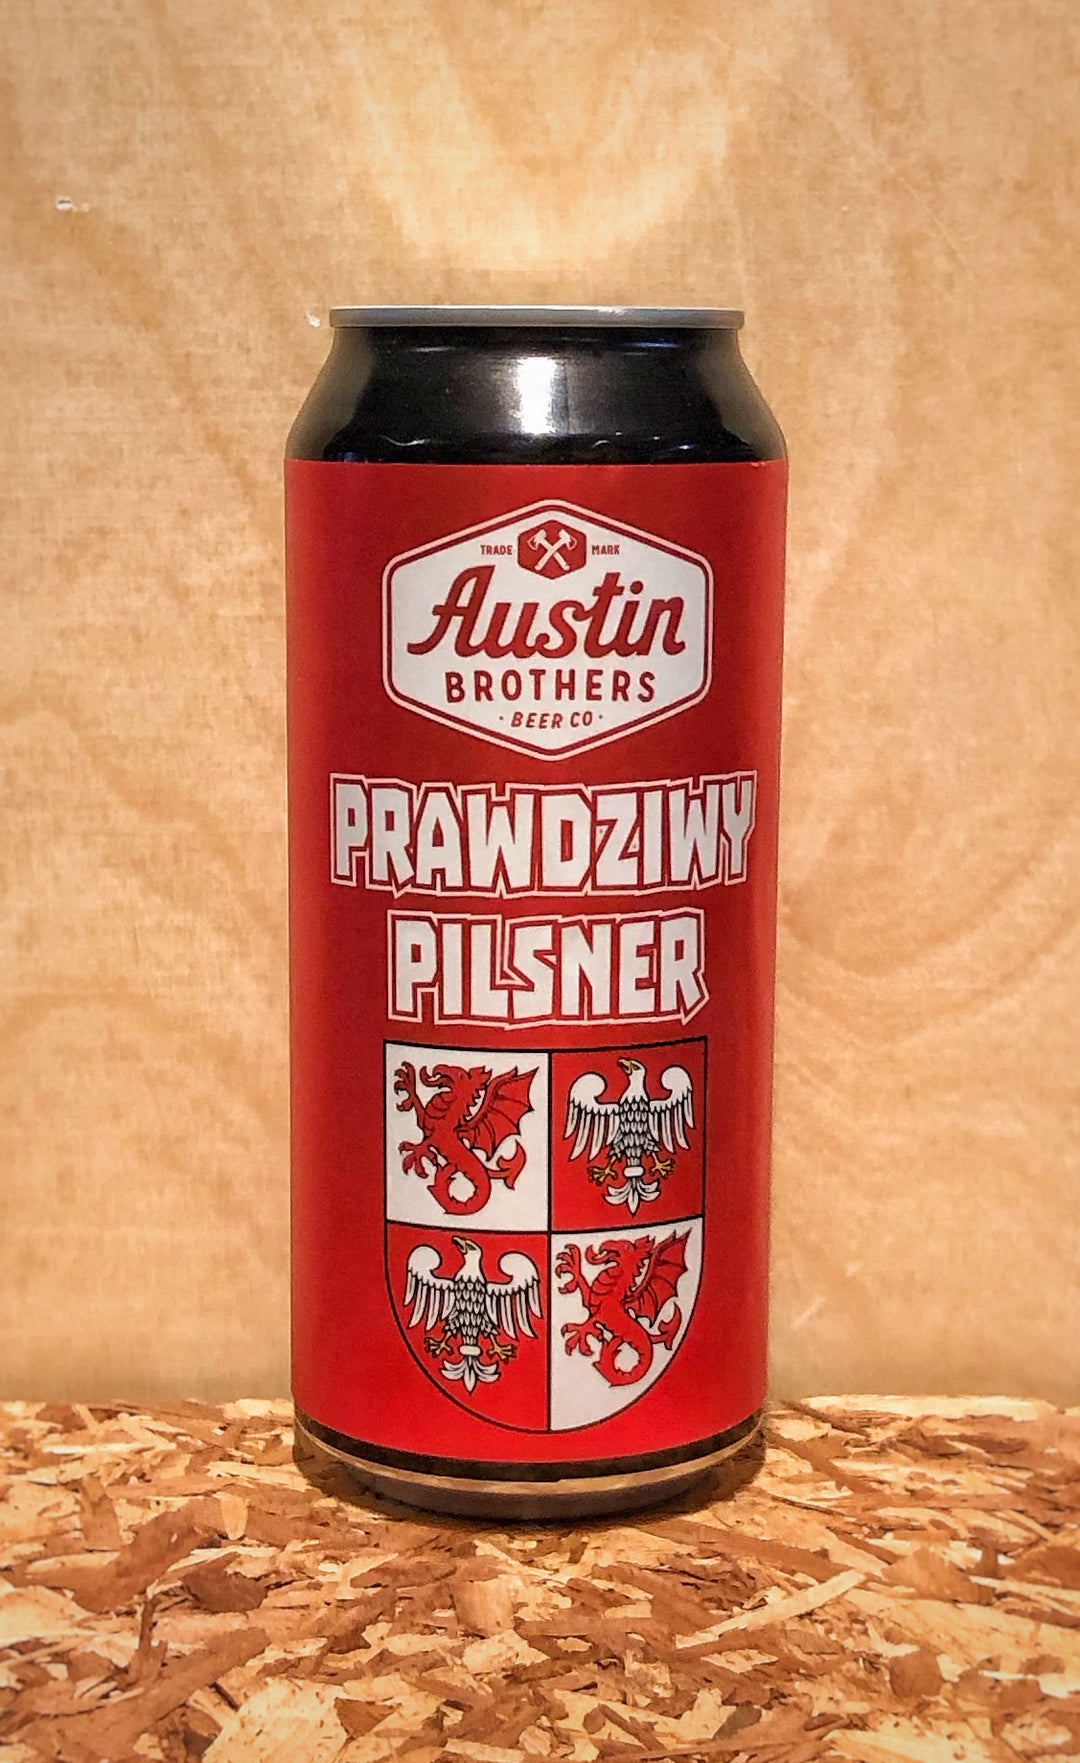 Austin Brothers Beer Co. 'Prawdziwy Pilsner' Polish Style Lager (Alpena, MI)